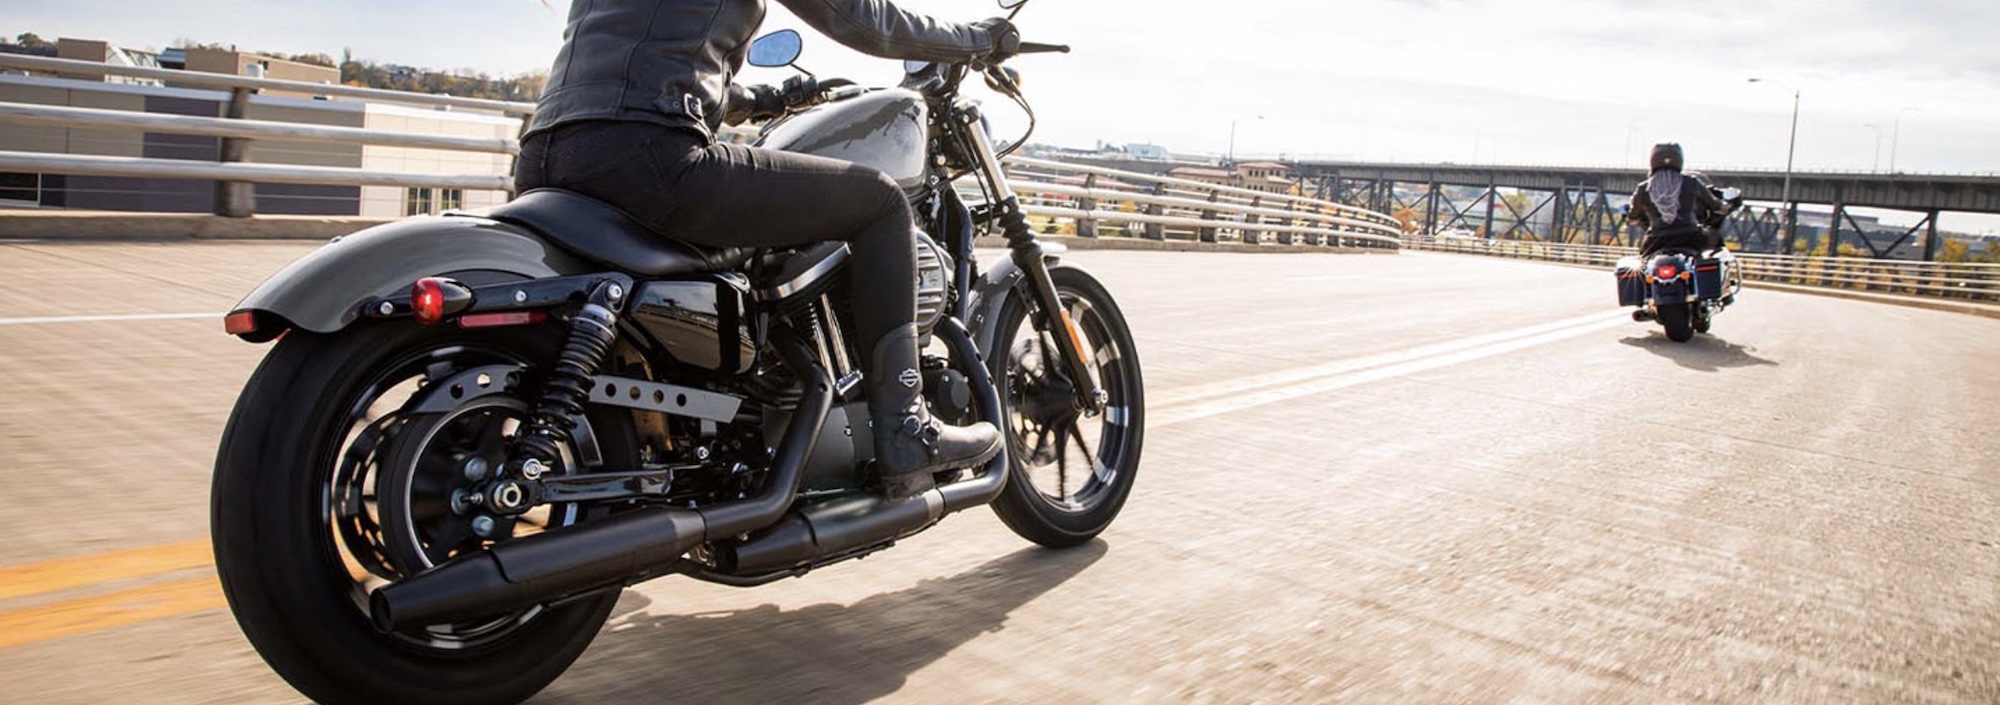 Harley's Iron 883. Media sourced from Harley-Davidson.